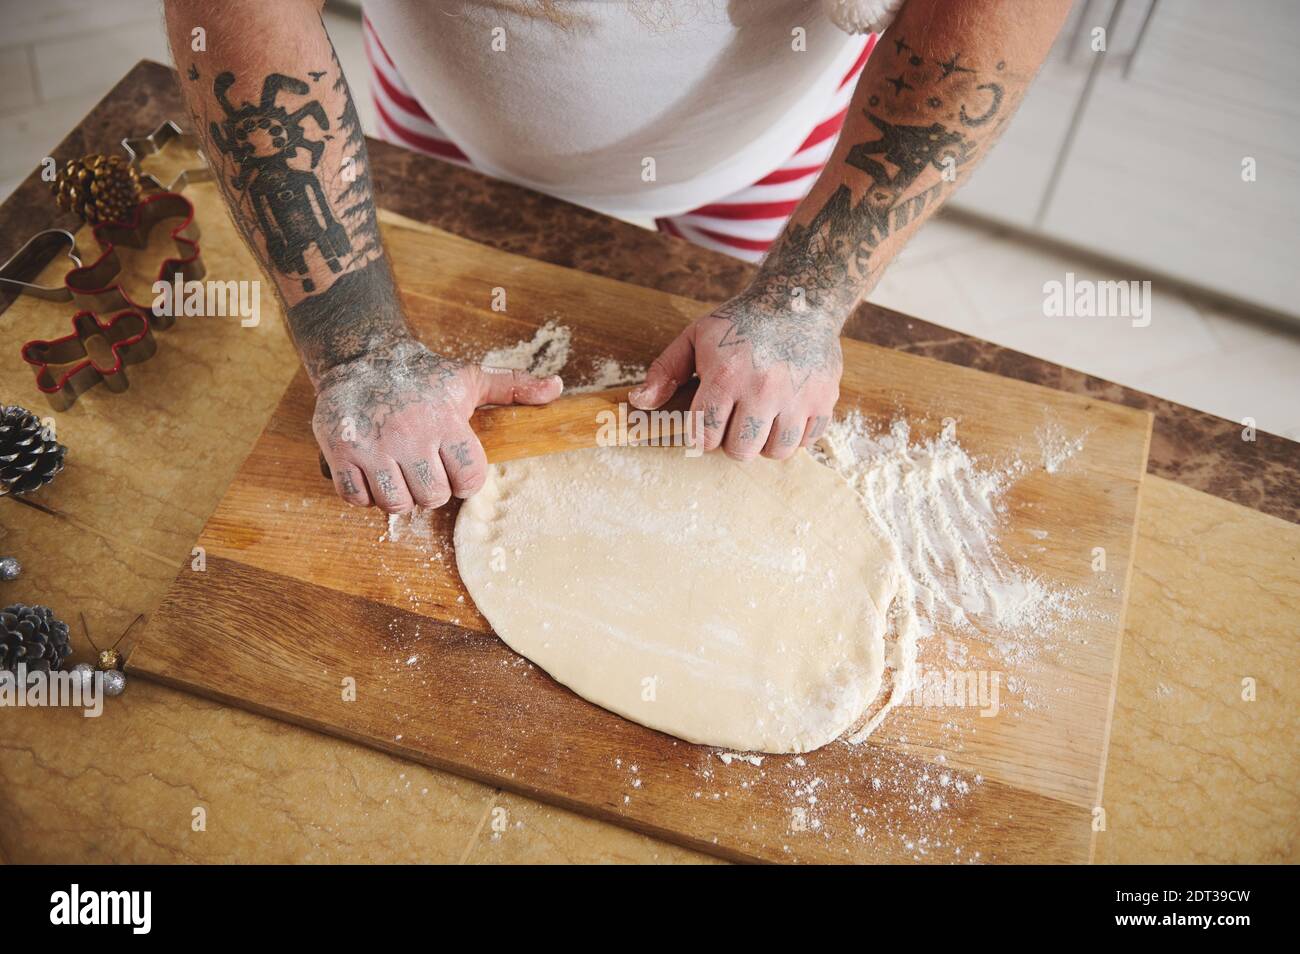 A man with a tattoo on his arms rolls out a flat dough on a wooden board Stock Photo